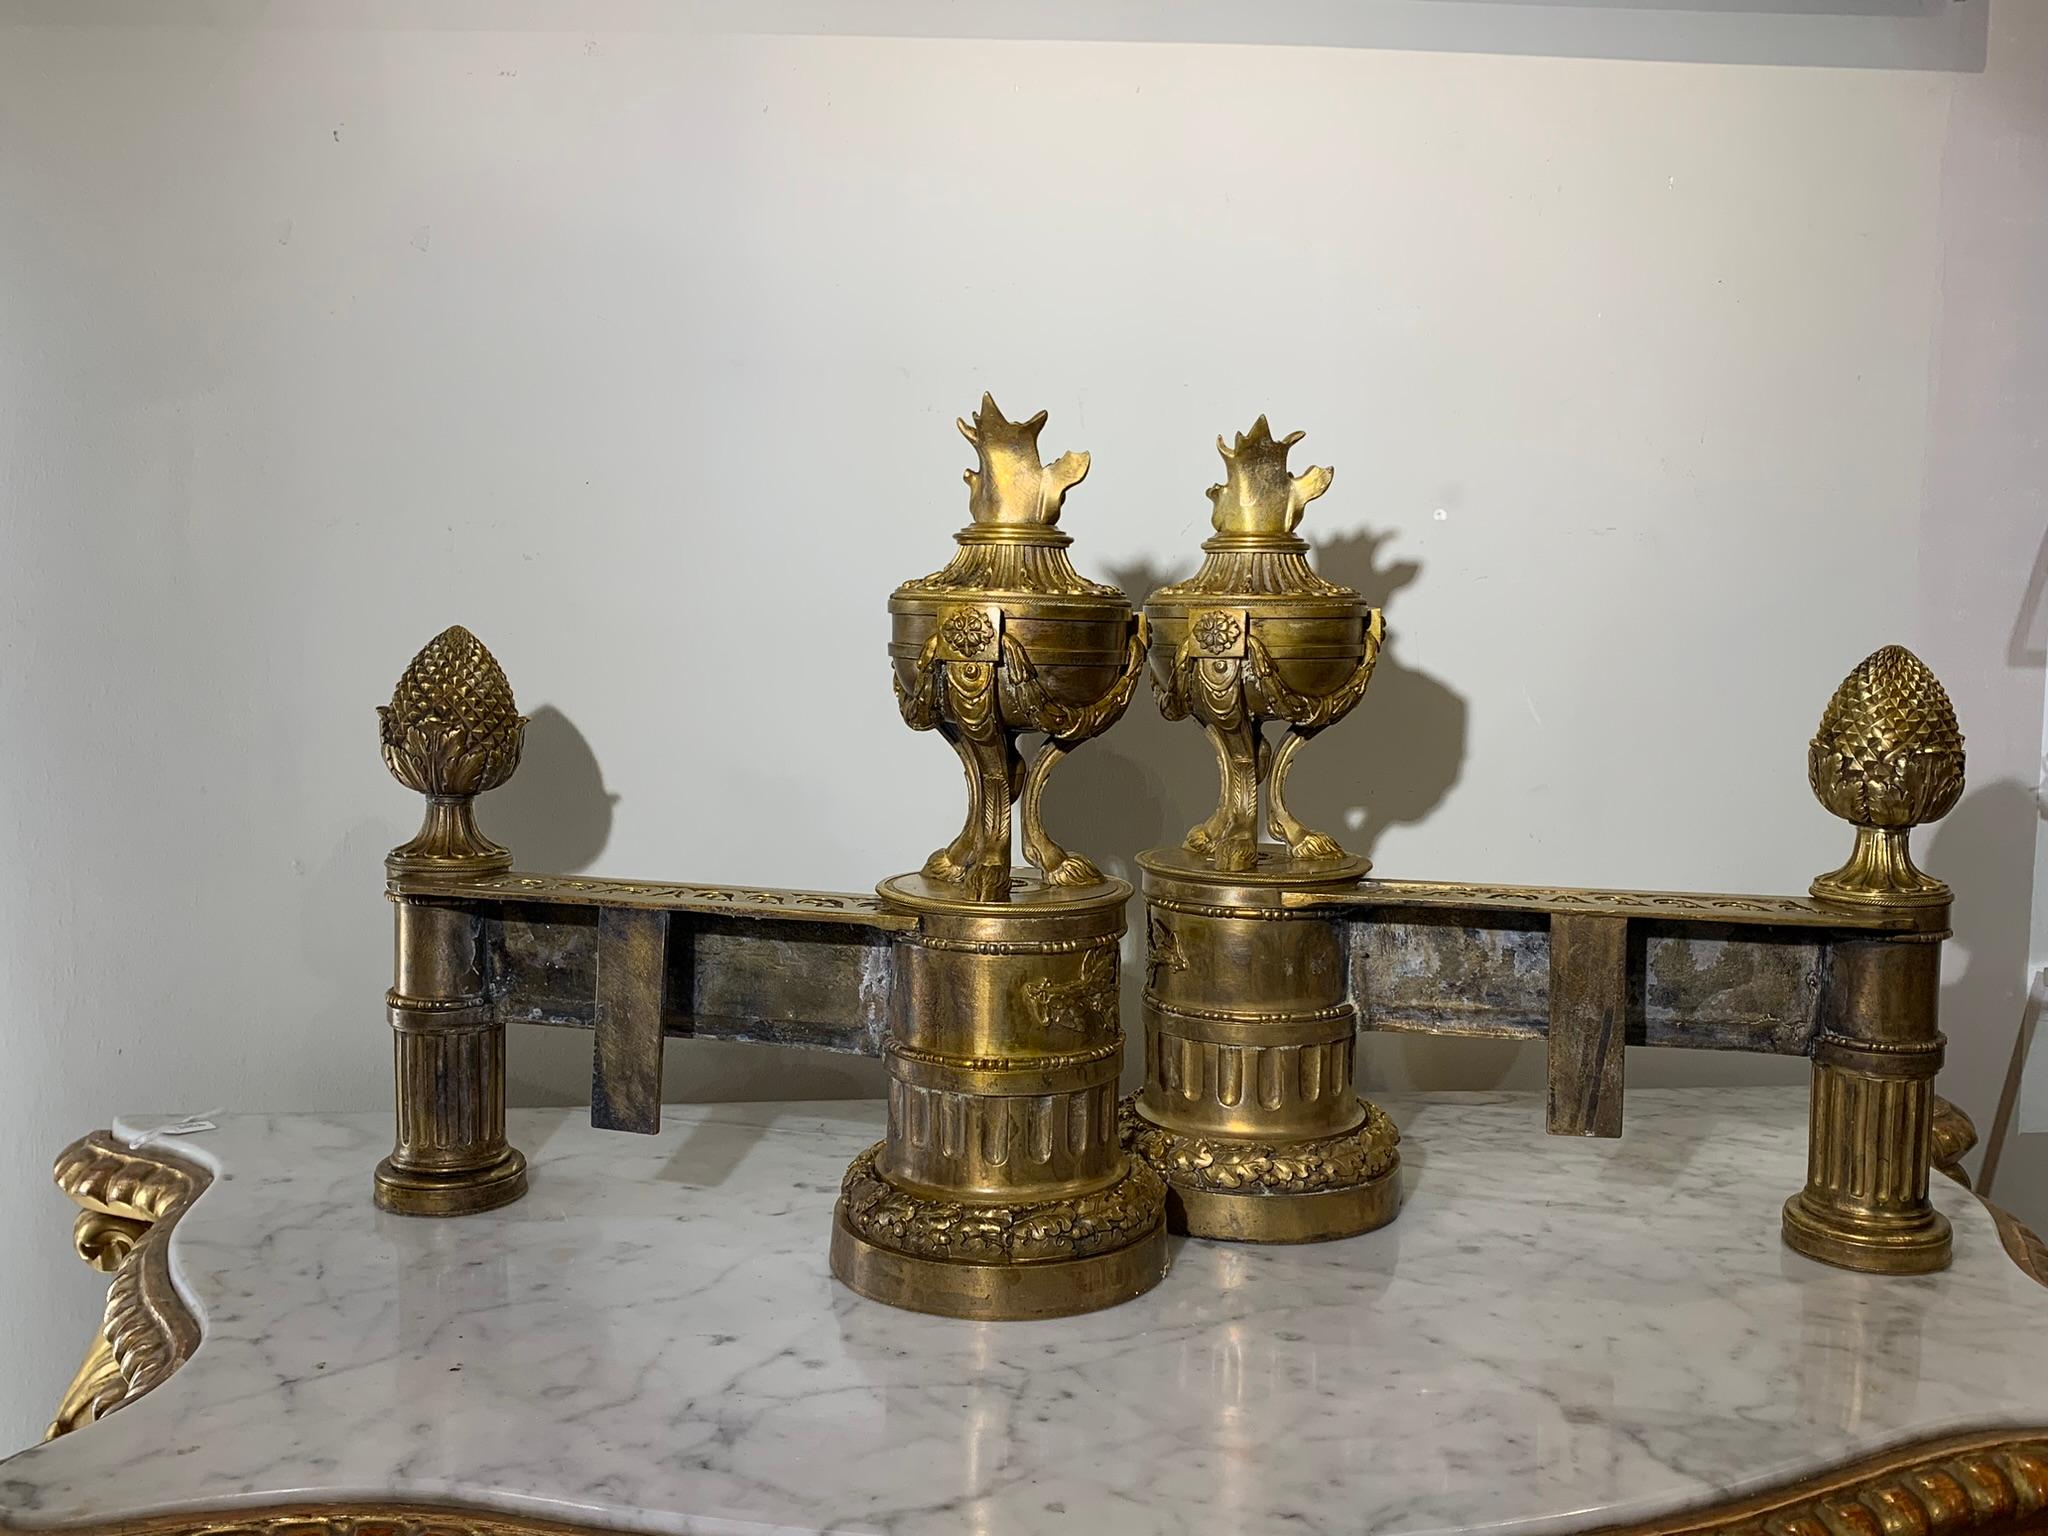 LATE 18th CENTURY PAIR OF NEOCLASSICAL GILDED BRONZE ANDIRONS For Sale 1